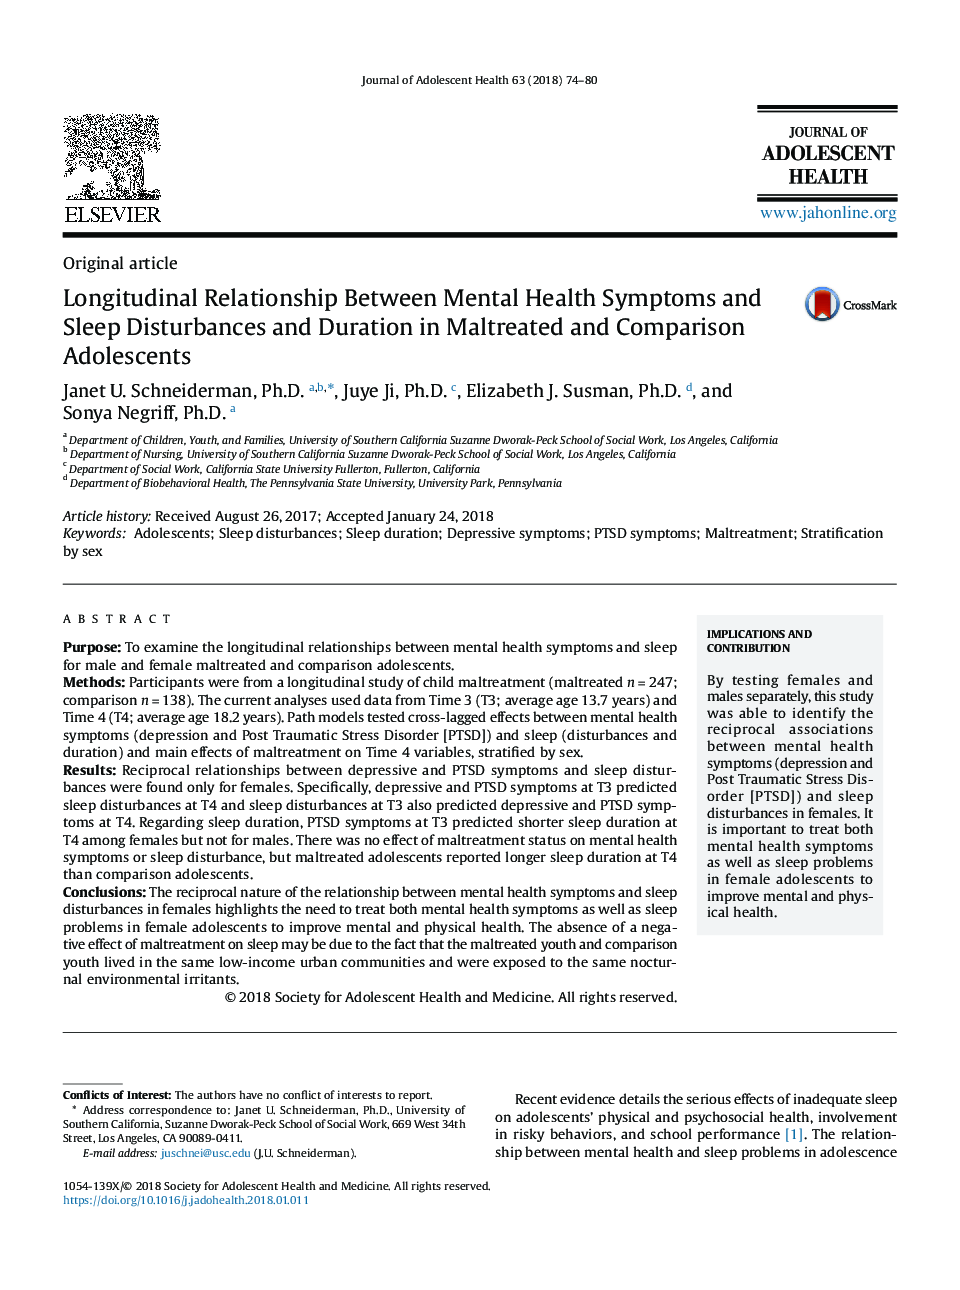 Longitudinal Relationship Between Mental Health Symptoms and Sleep Disturbances and Duration in Maltreated and Comparison Adolescents